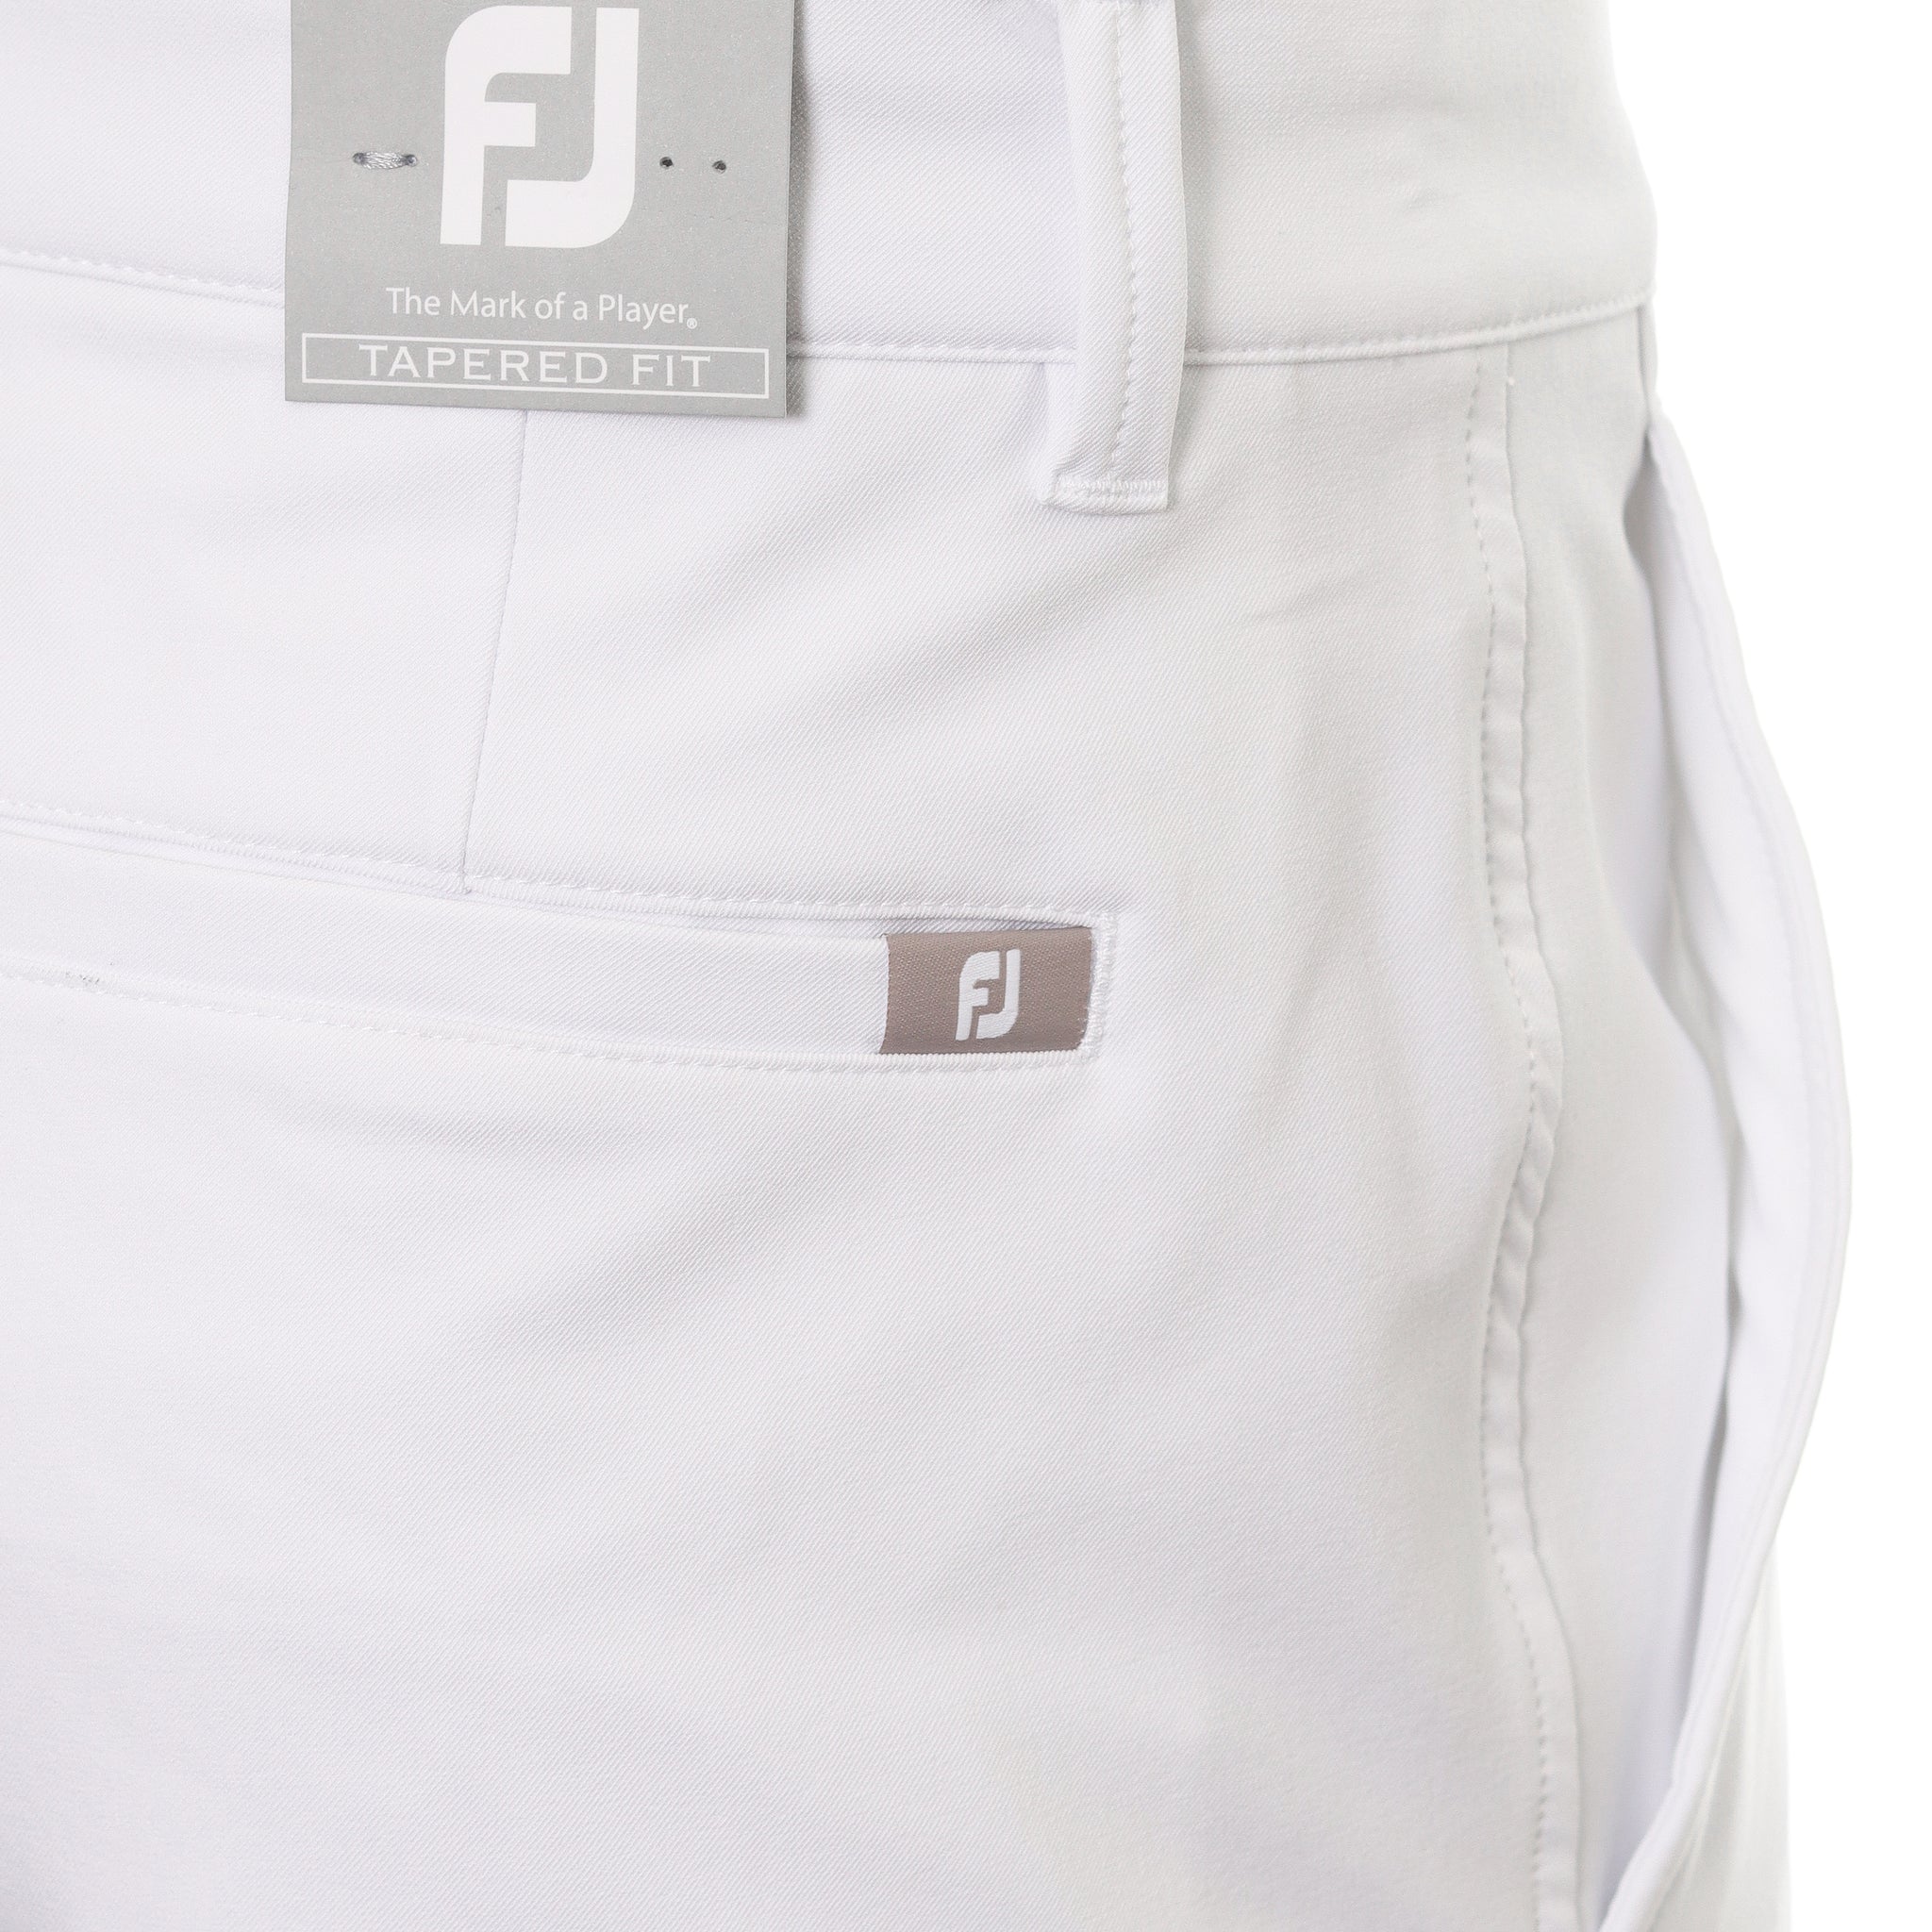 footjoy-fj-performance-tapered-fit-trousers-80159-white